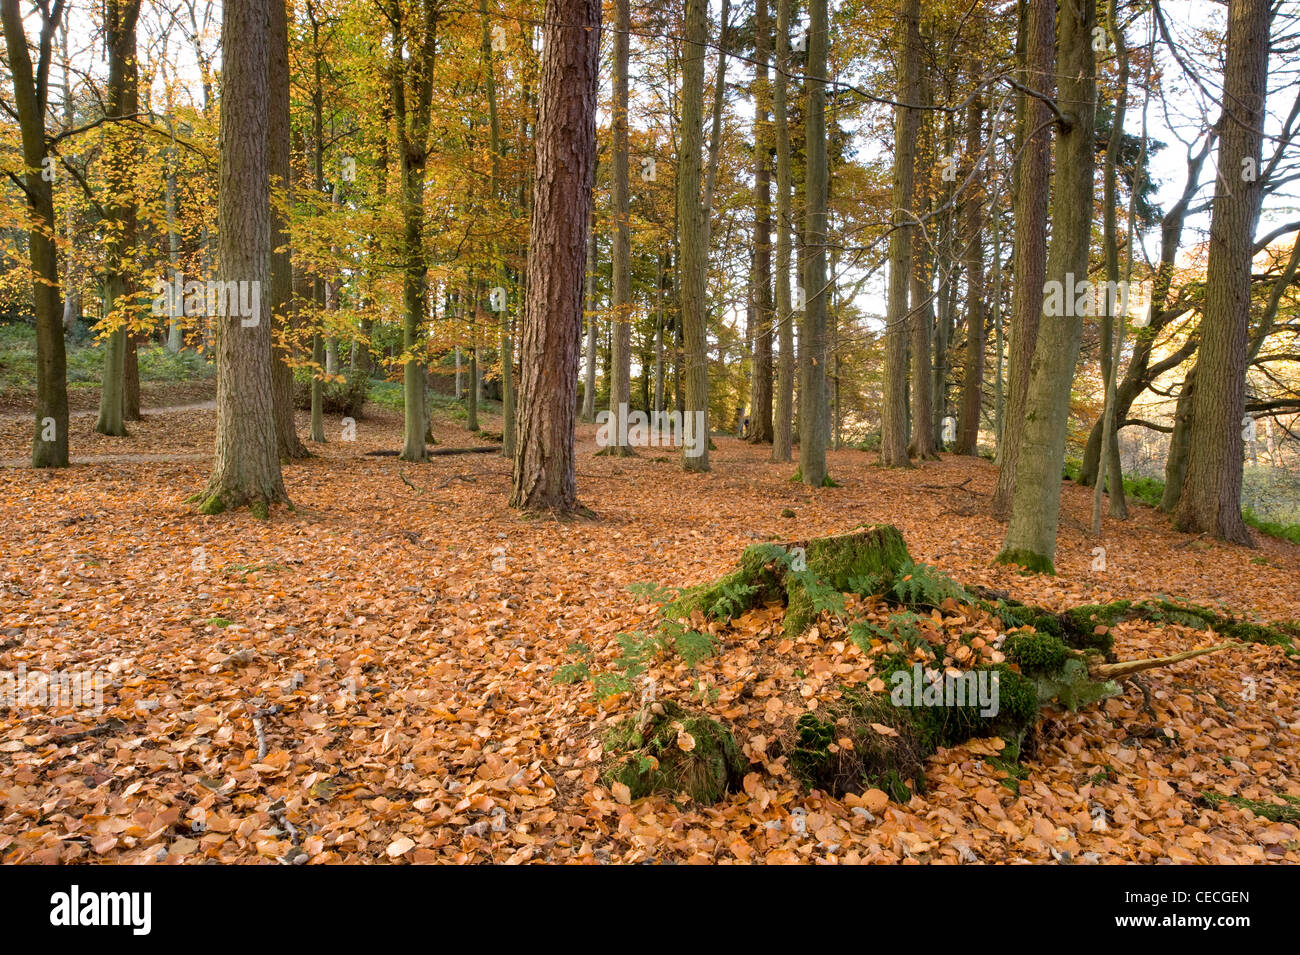 Autumn carpet of golden brown leaves, trees & tree stump in scenic peaceful woodland - Strid Woods, Bolton Abbey Estate, Yorkshire Dales, England, UK Stock Photo